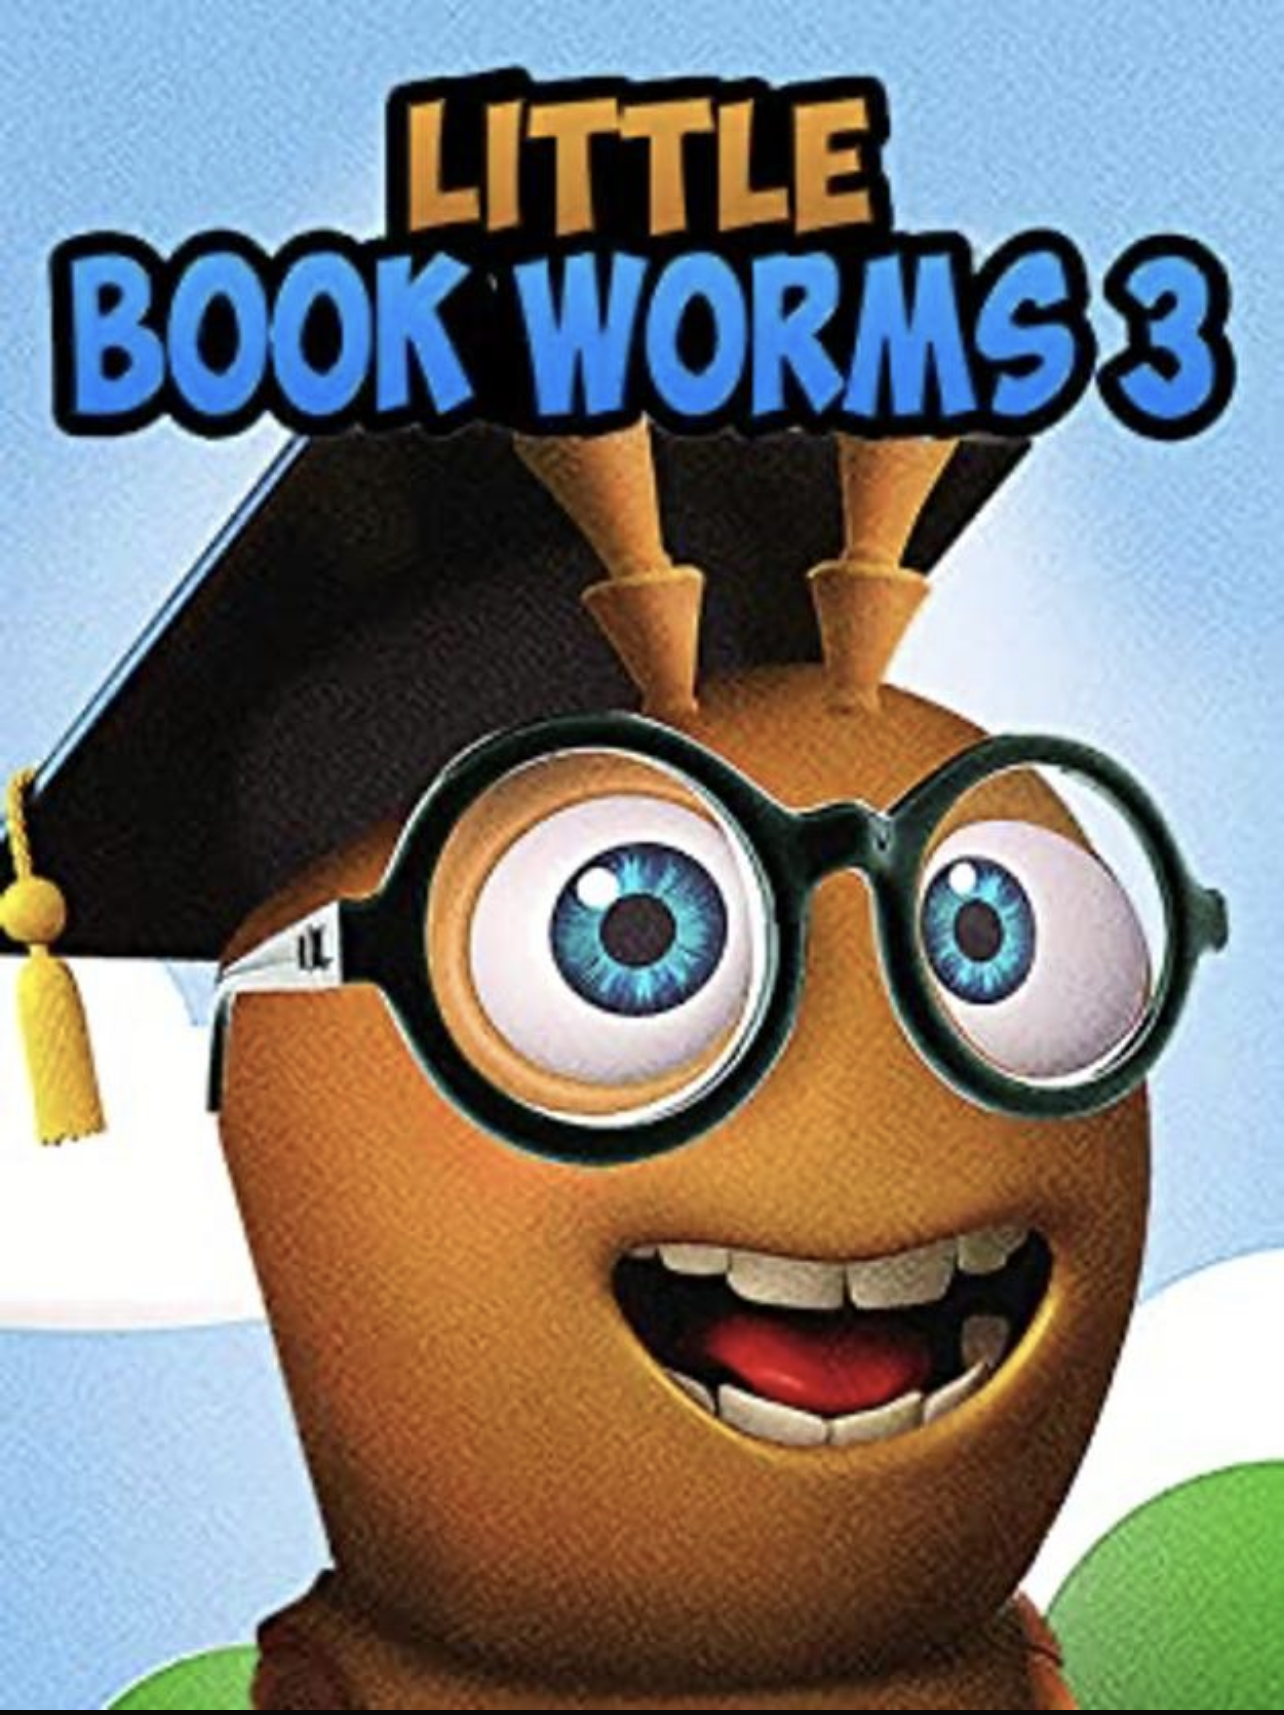 Little Book Worms 3